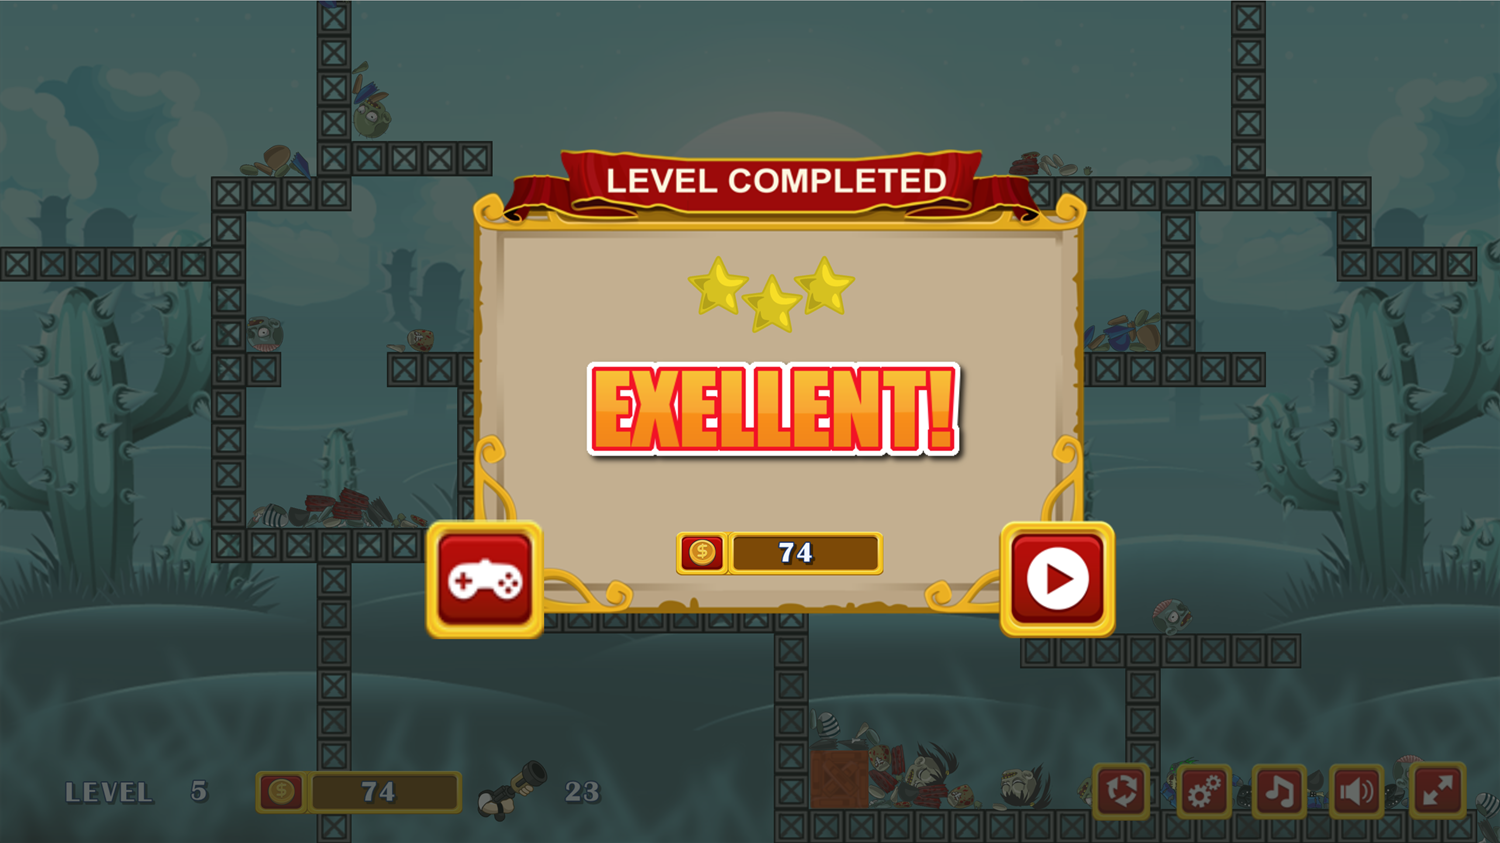 Stan the Man Game Level Completed Screen Screenshot.